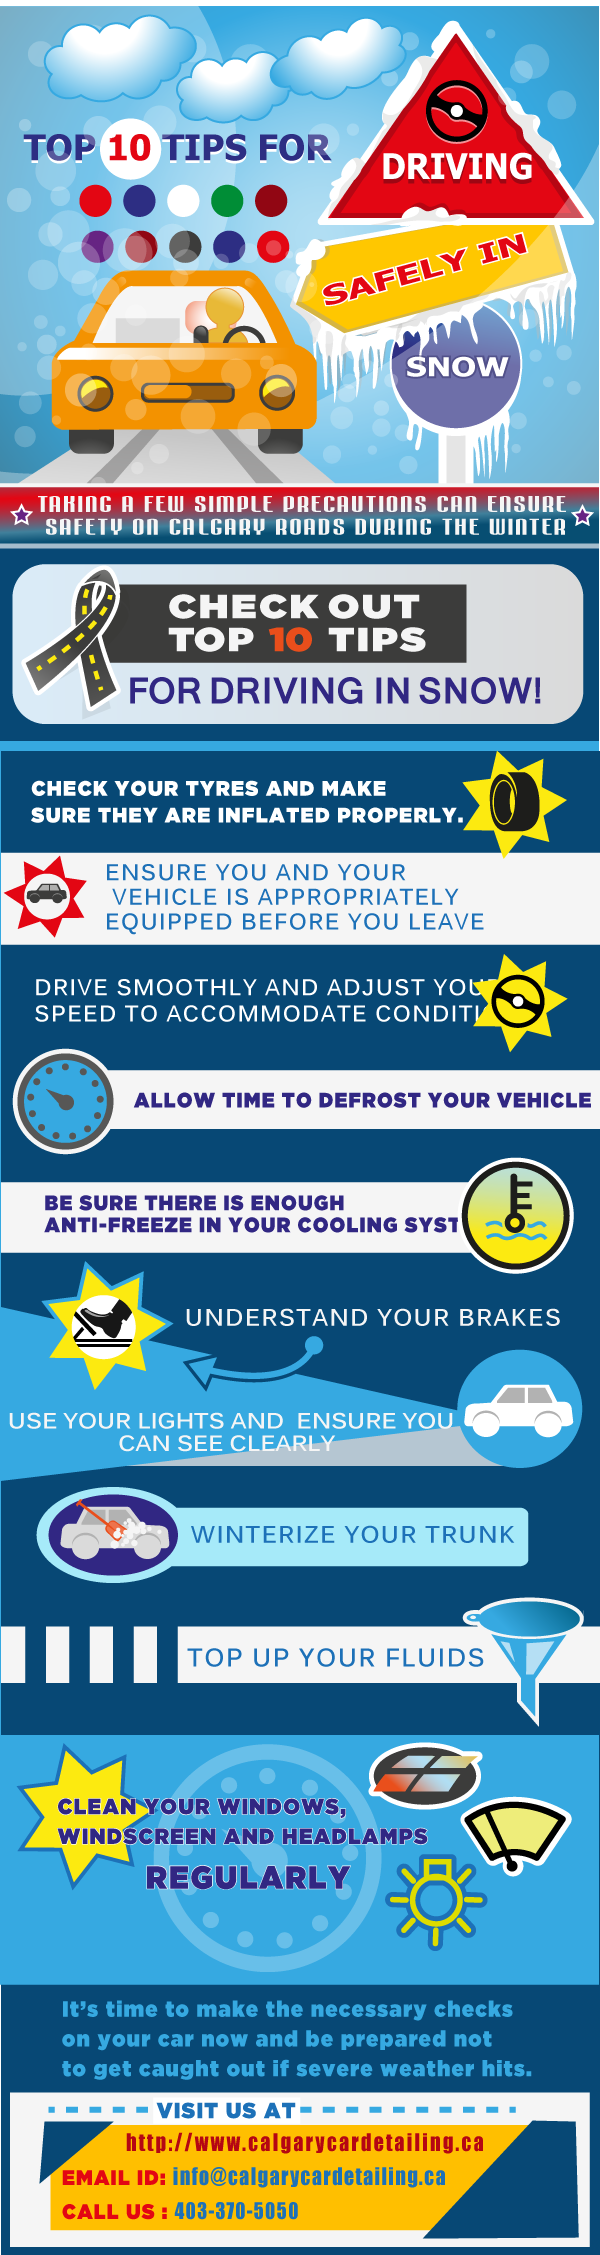 Tips for Driving in Snow